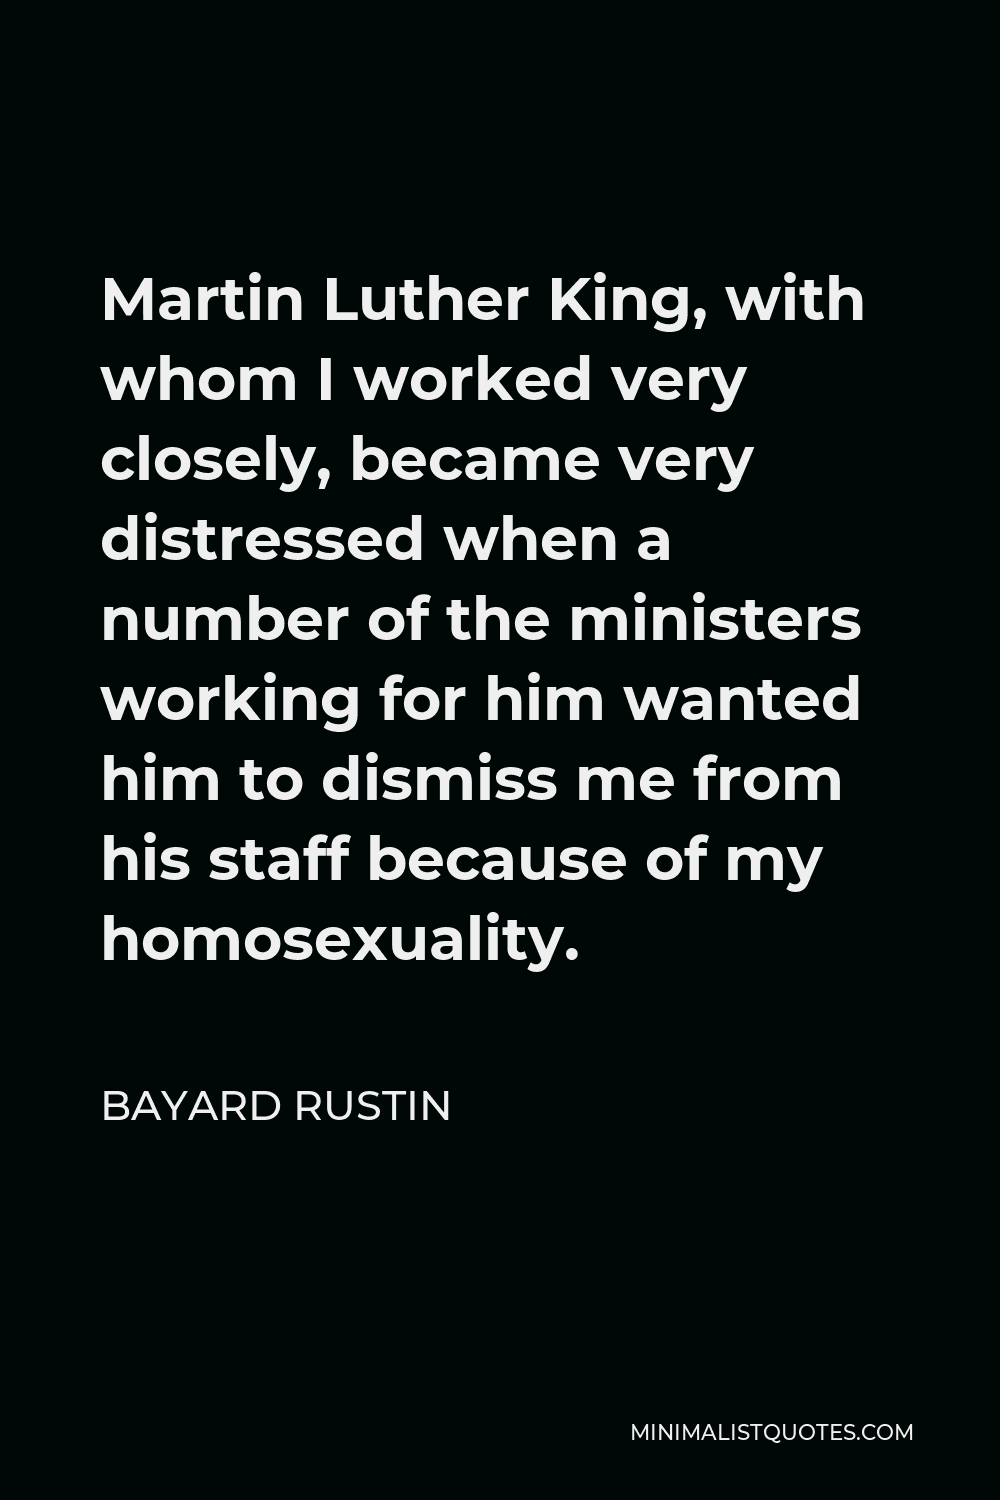 Bayard Rustin Quote - Martin Luther King, with whom I worked very closely, became very distressed when a number of the ministers working for him wanted him to dismiss me from his staff because of my homosexuality.